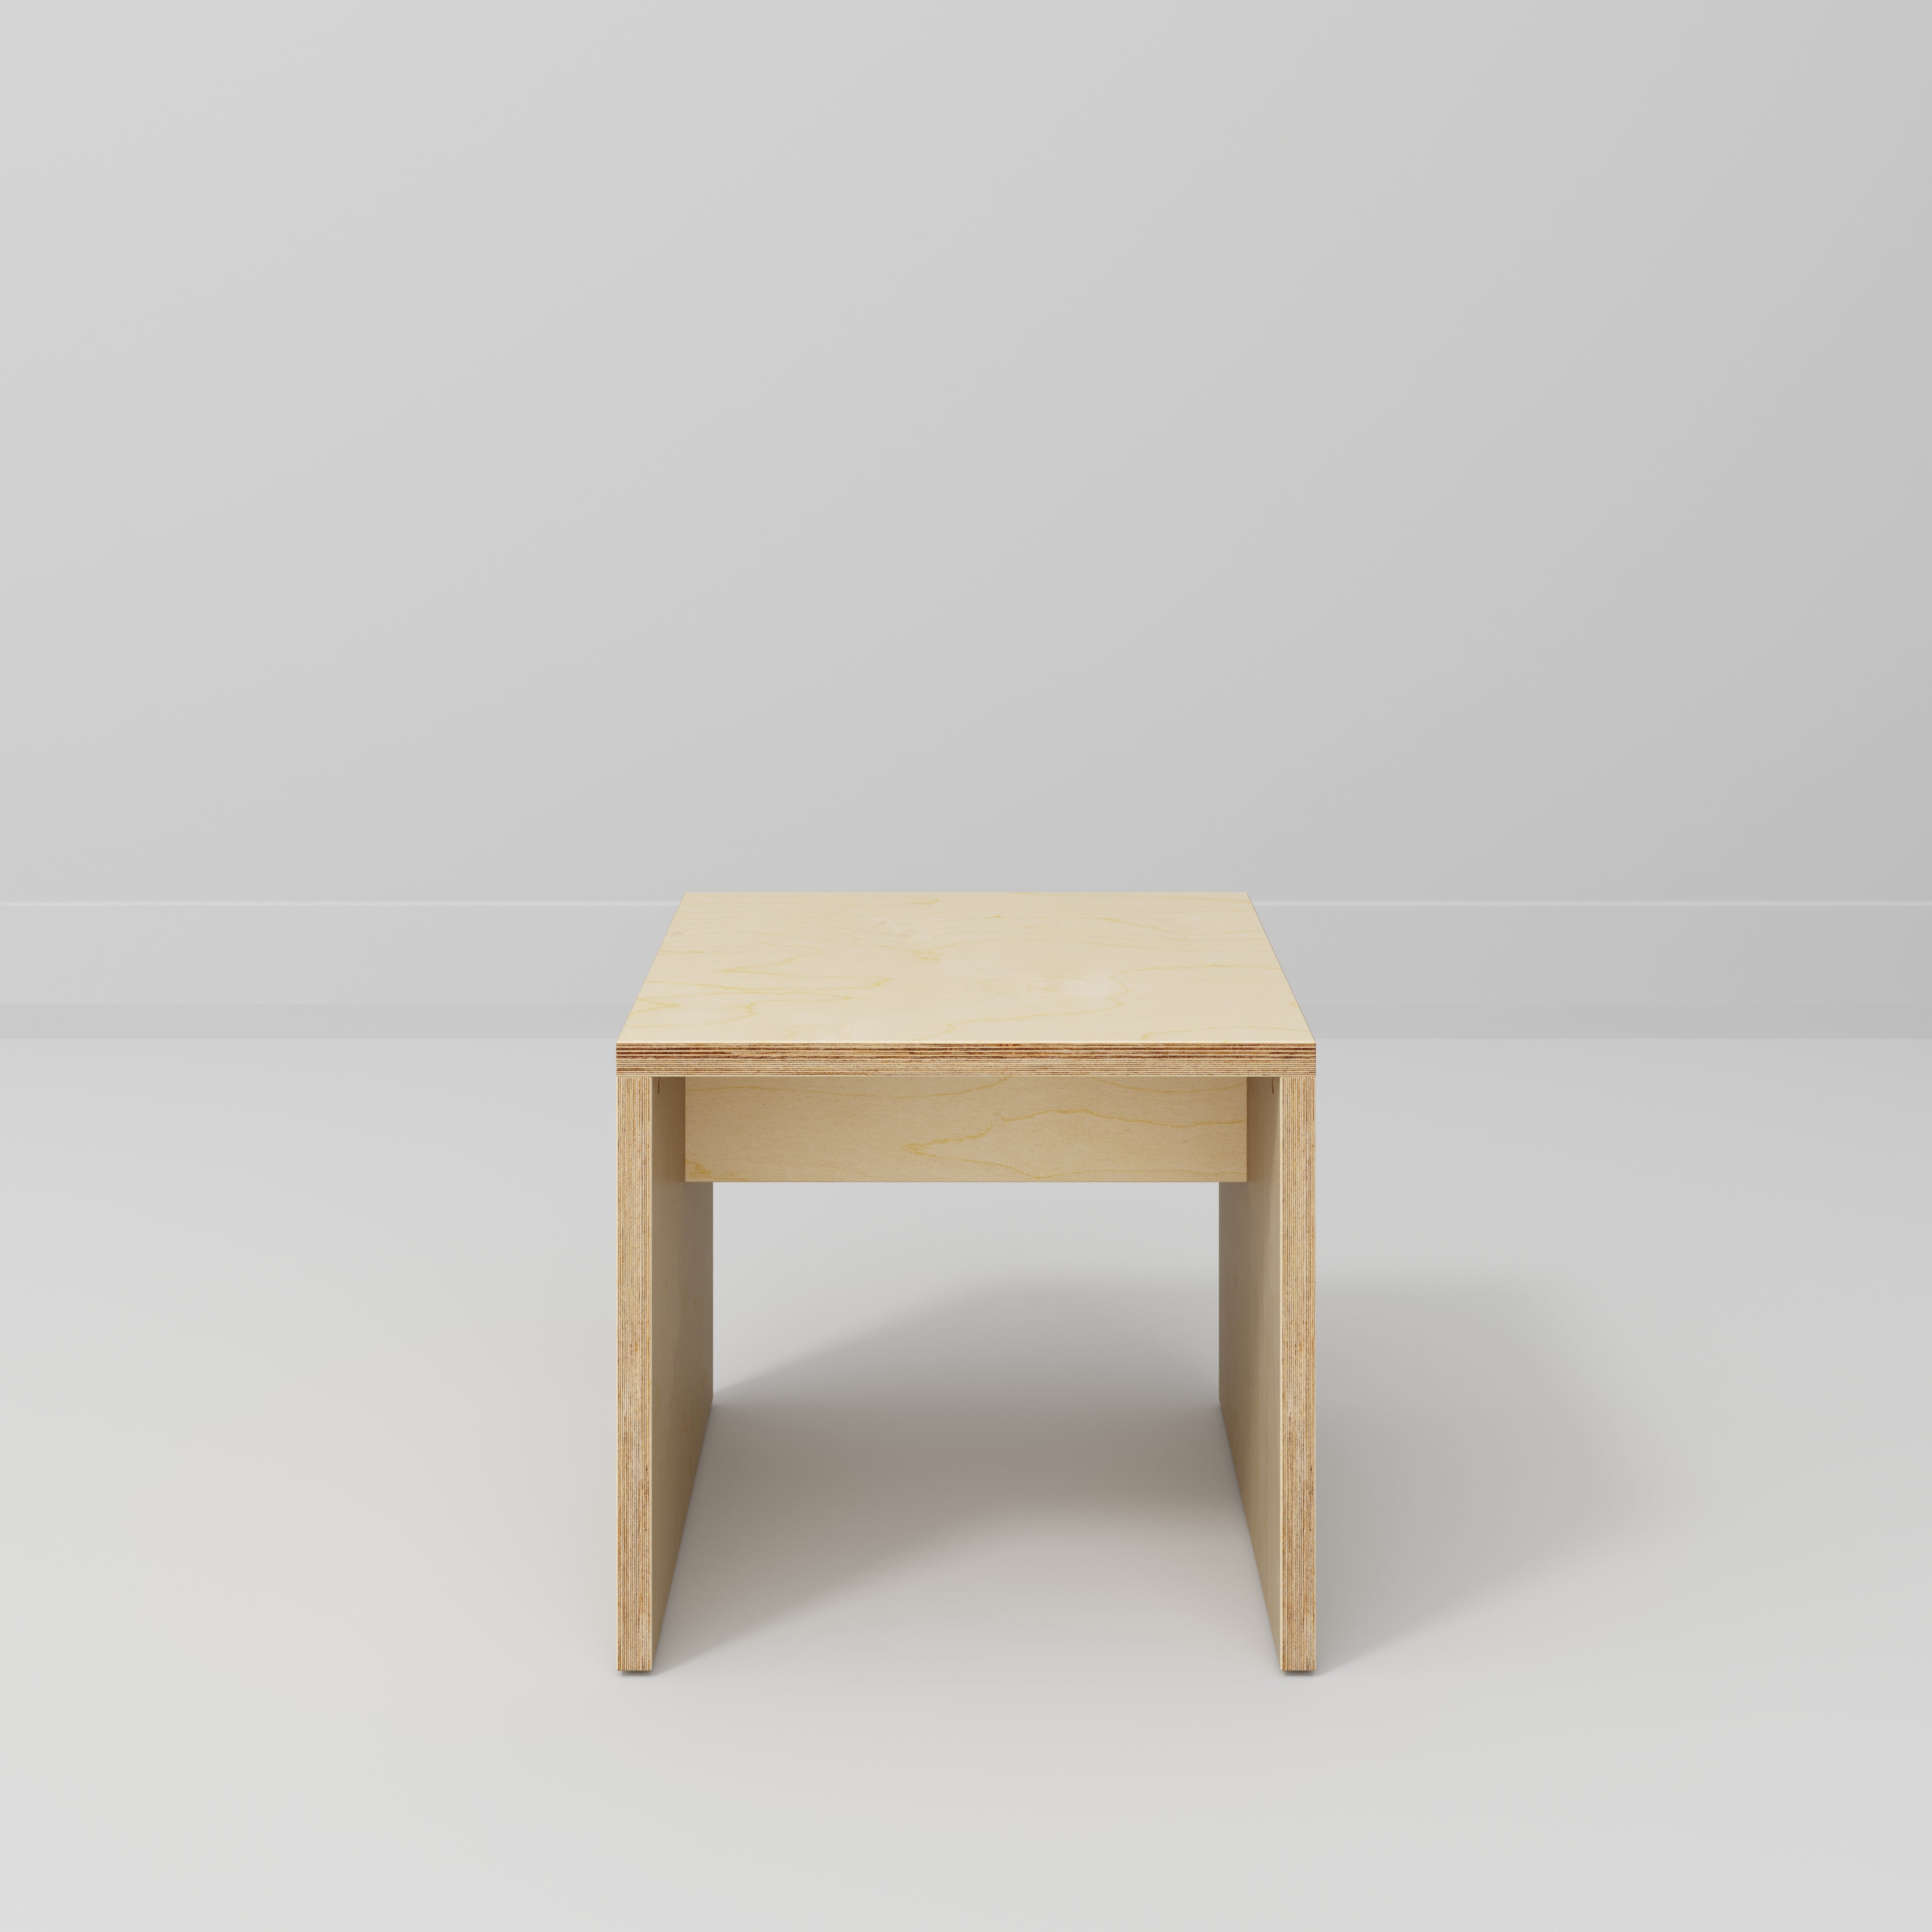 Custom Plywood Side Table with Solid Sides